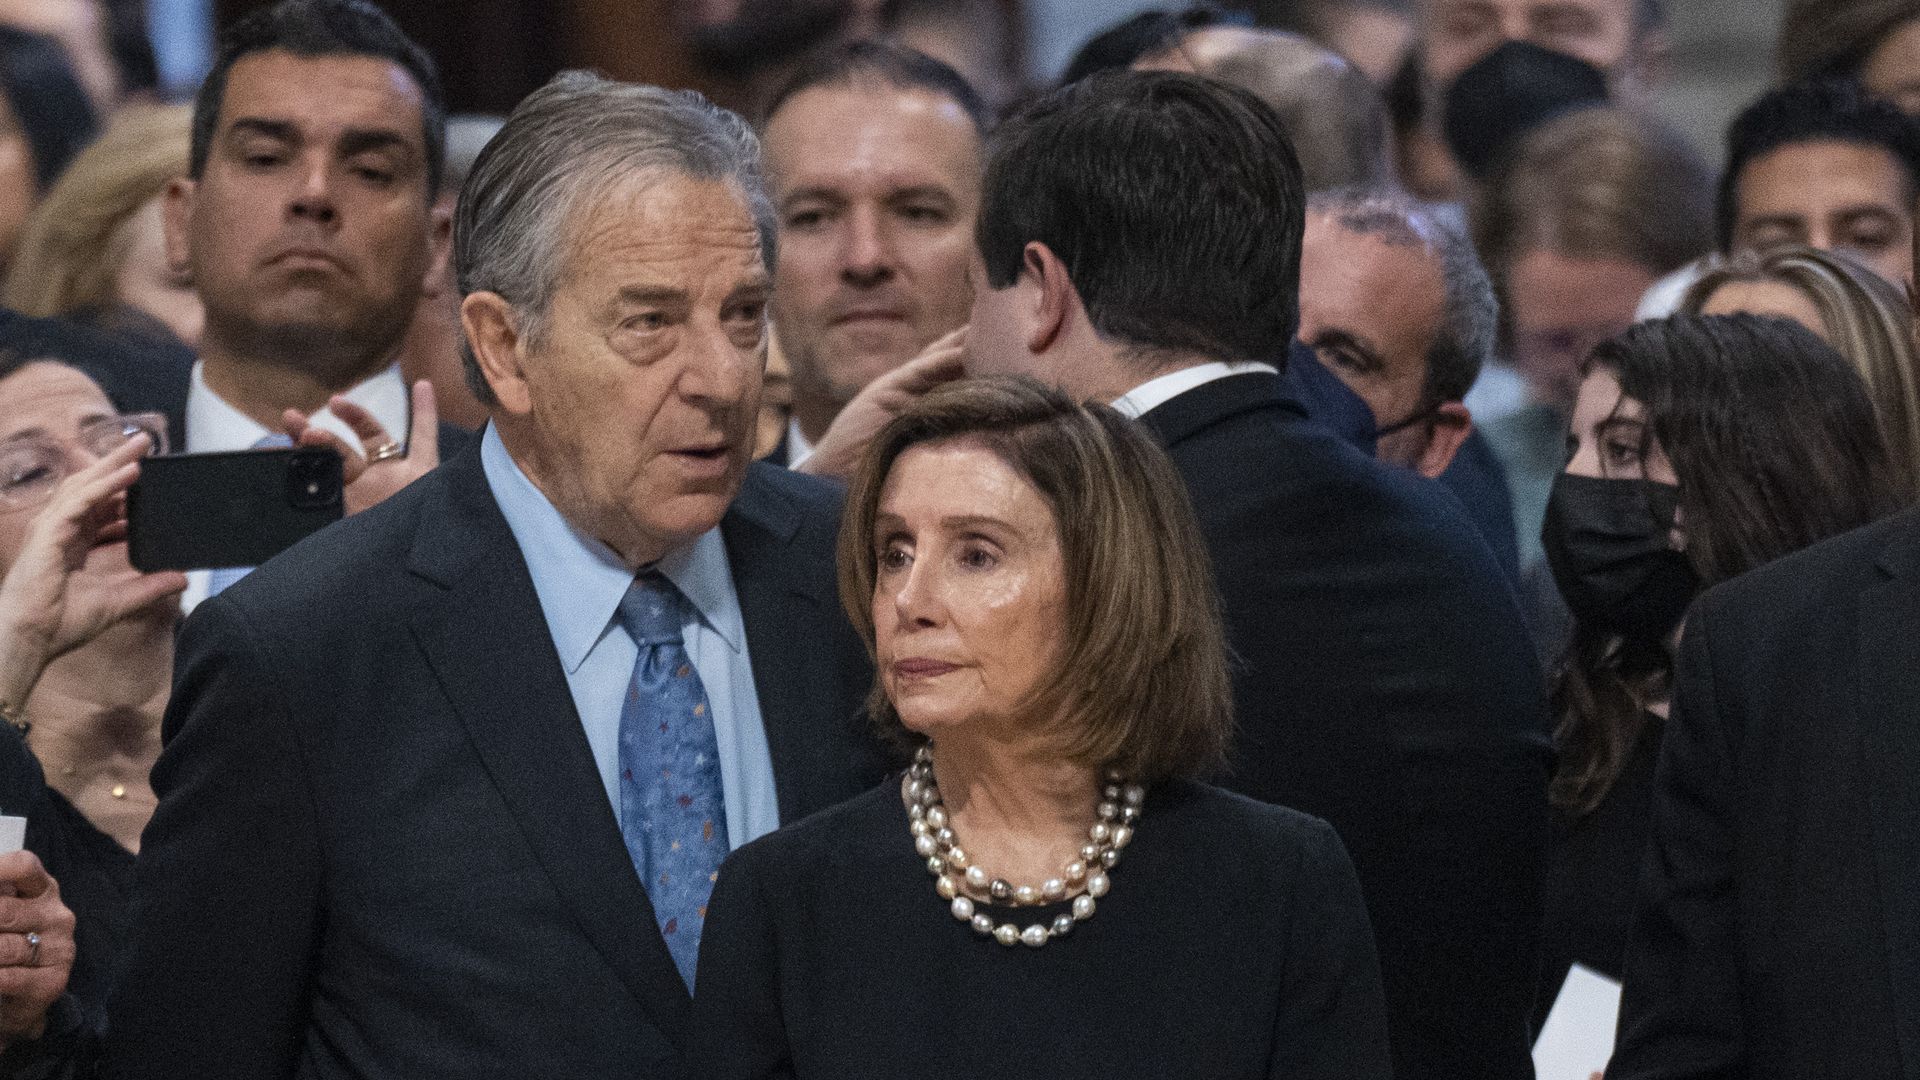  House  Speaker Nancy Pelosi (R), with her husband Paul Pelosi (C), attend a Holy Mass for the Solemnity of Saints Peter and Paul led by Pope Francis in St. Peter's Basilica.